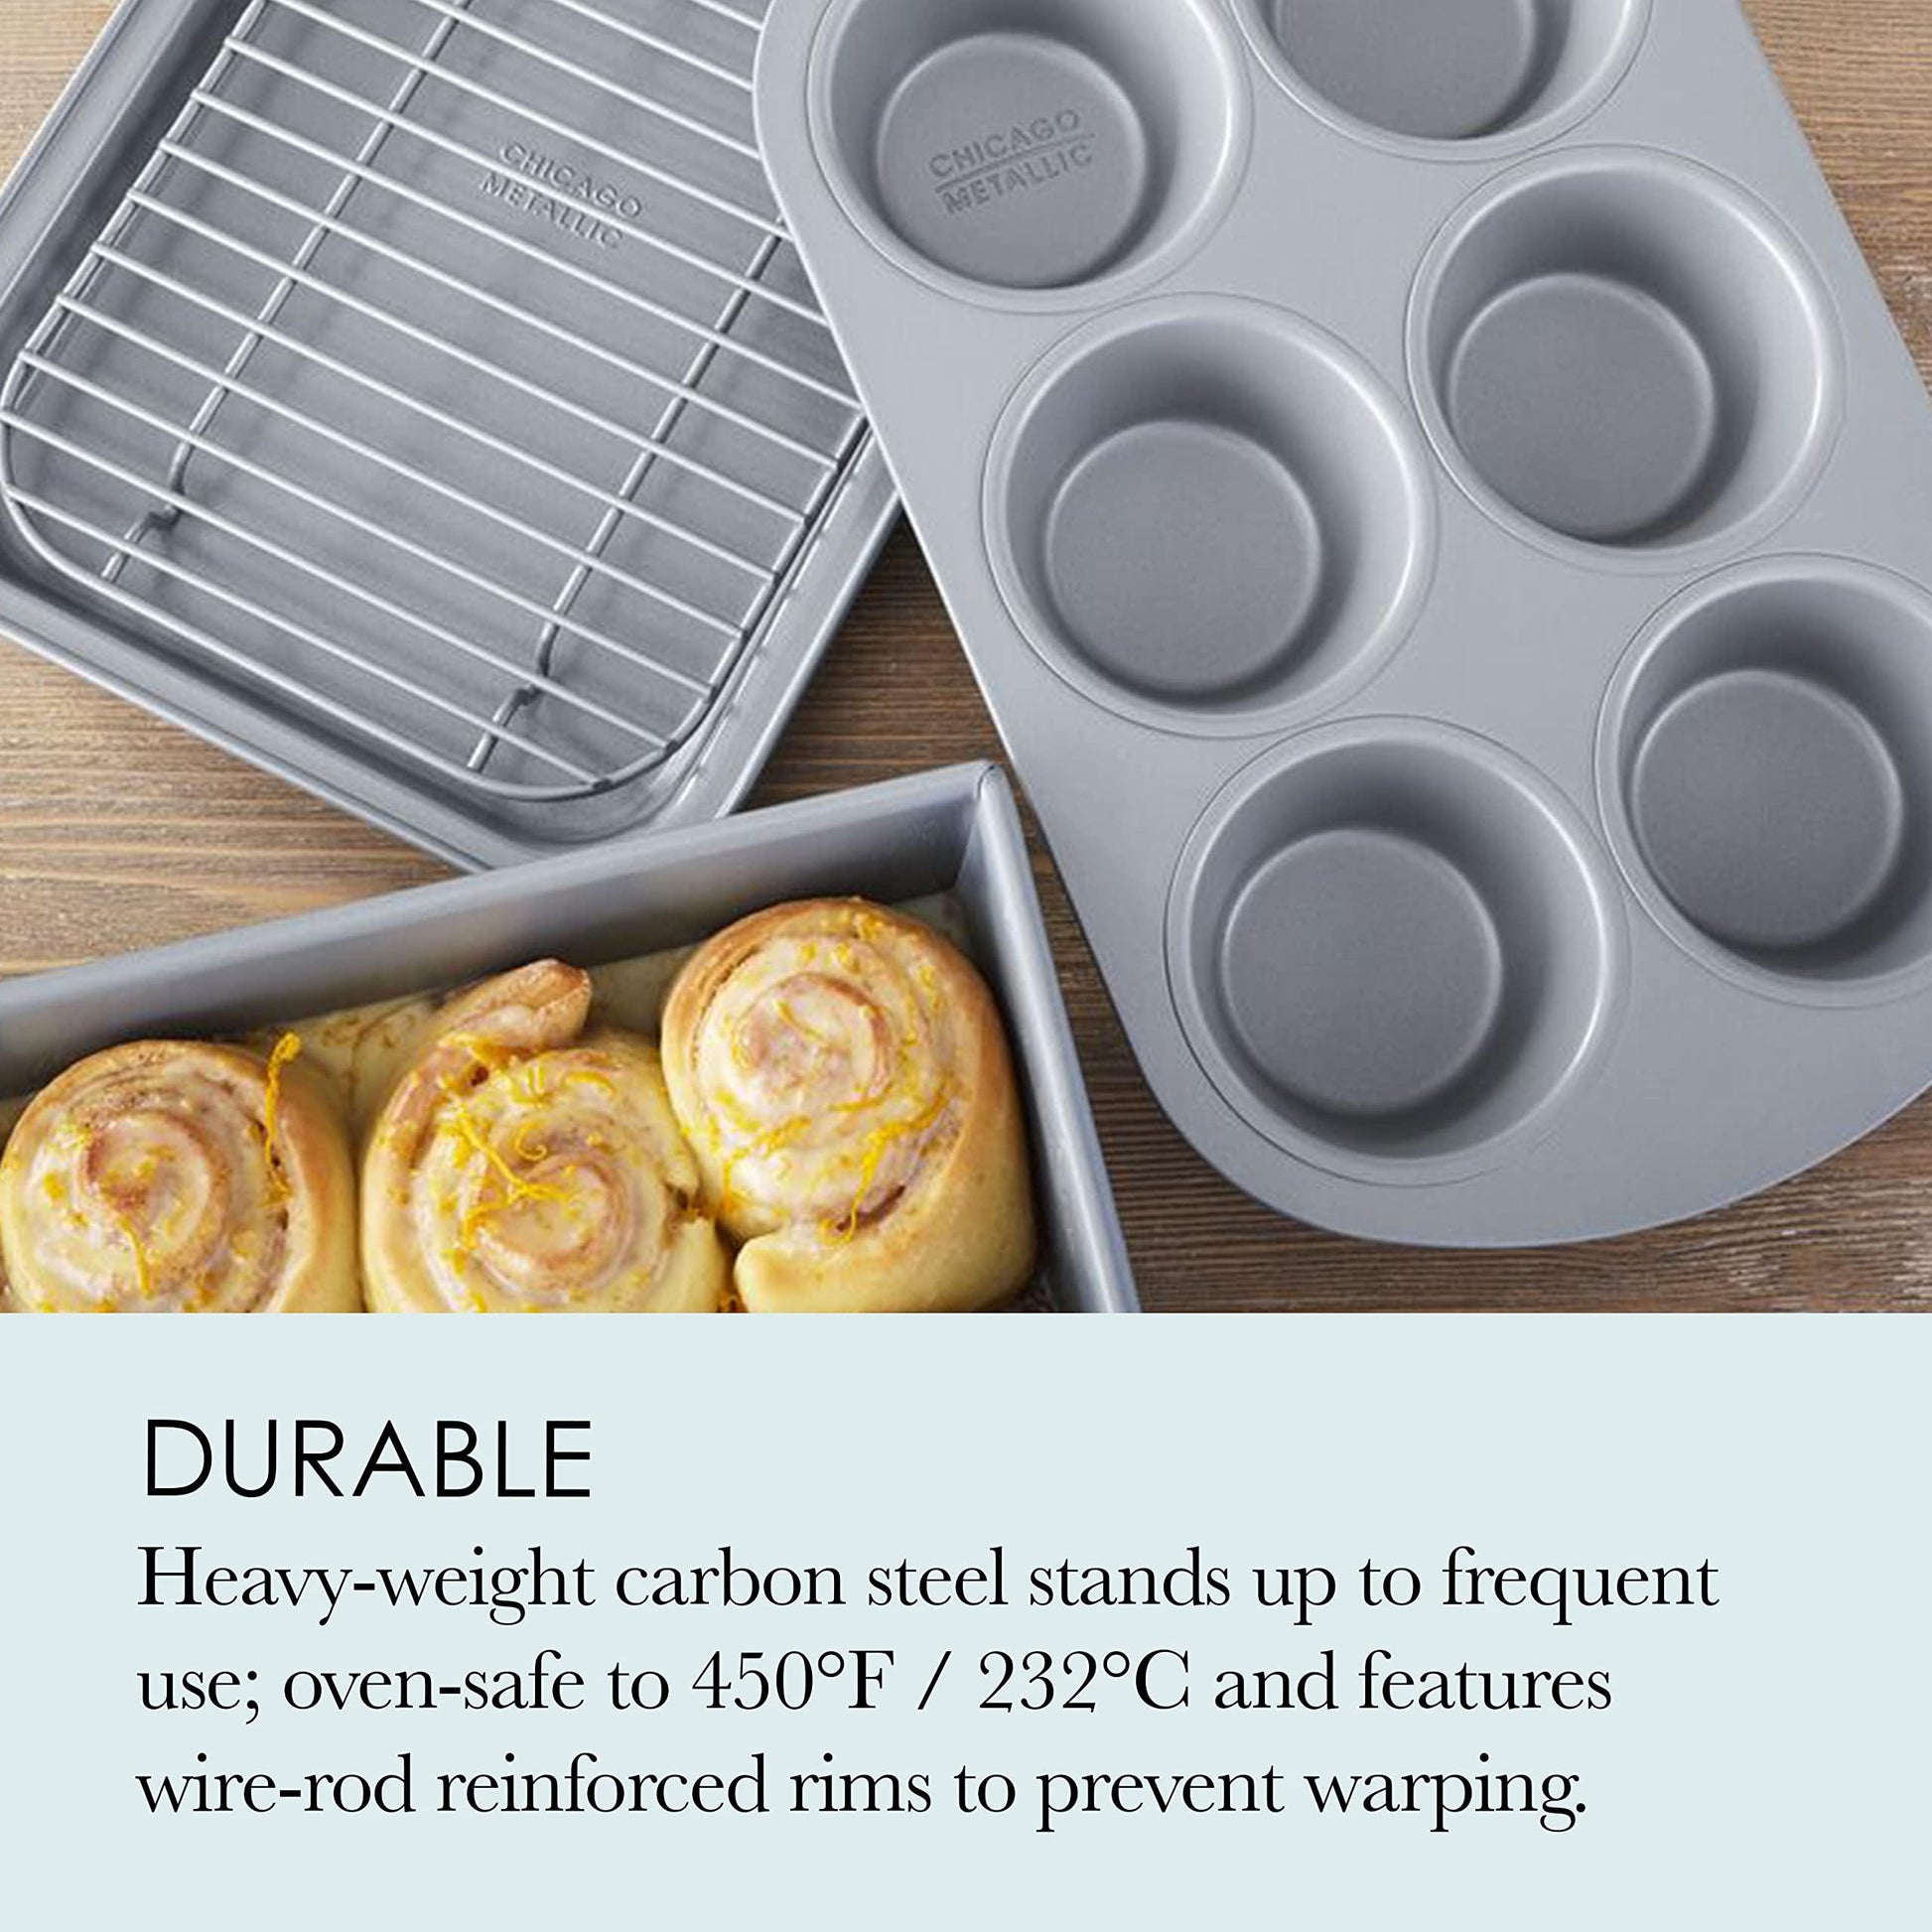 Chicago Metallic Non-Stick Toaster Oven Bakeware Set, 4-Piece, Carbon Steel - CookCave